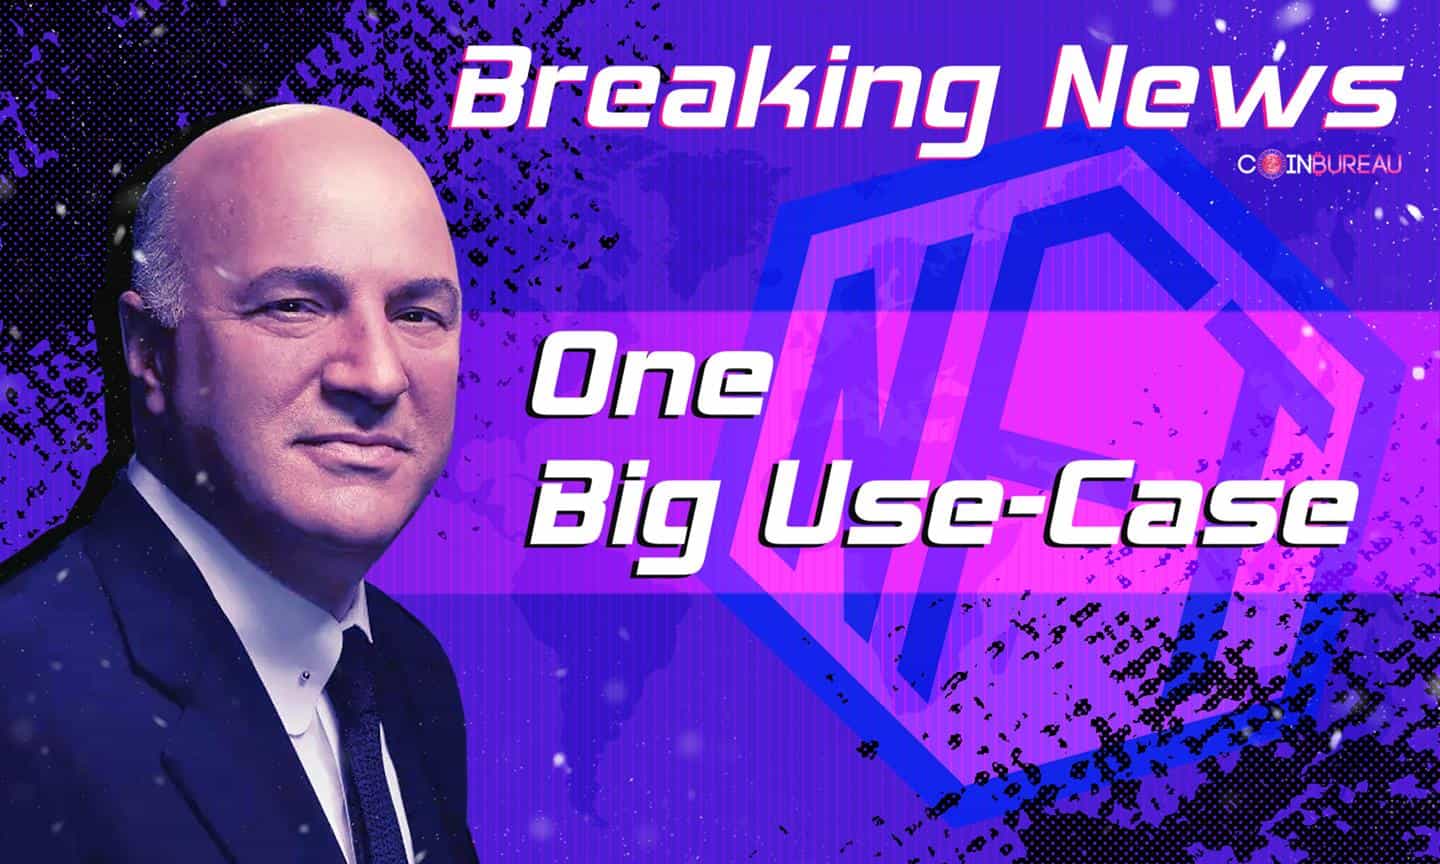 Kevin O’Leary Of Shark Tank Says NFT Market Will Be ‘Absolutely Huge’, Names One Big Use-Case